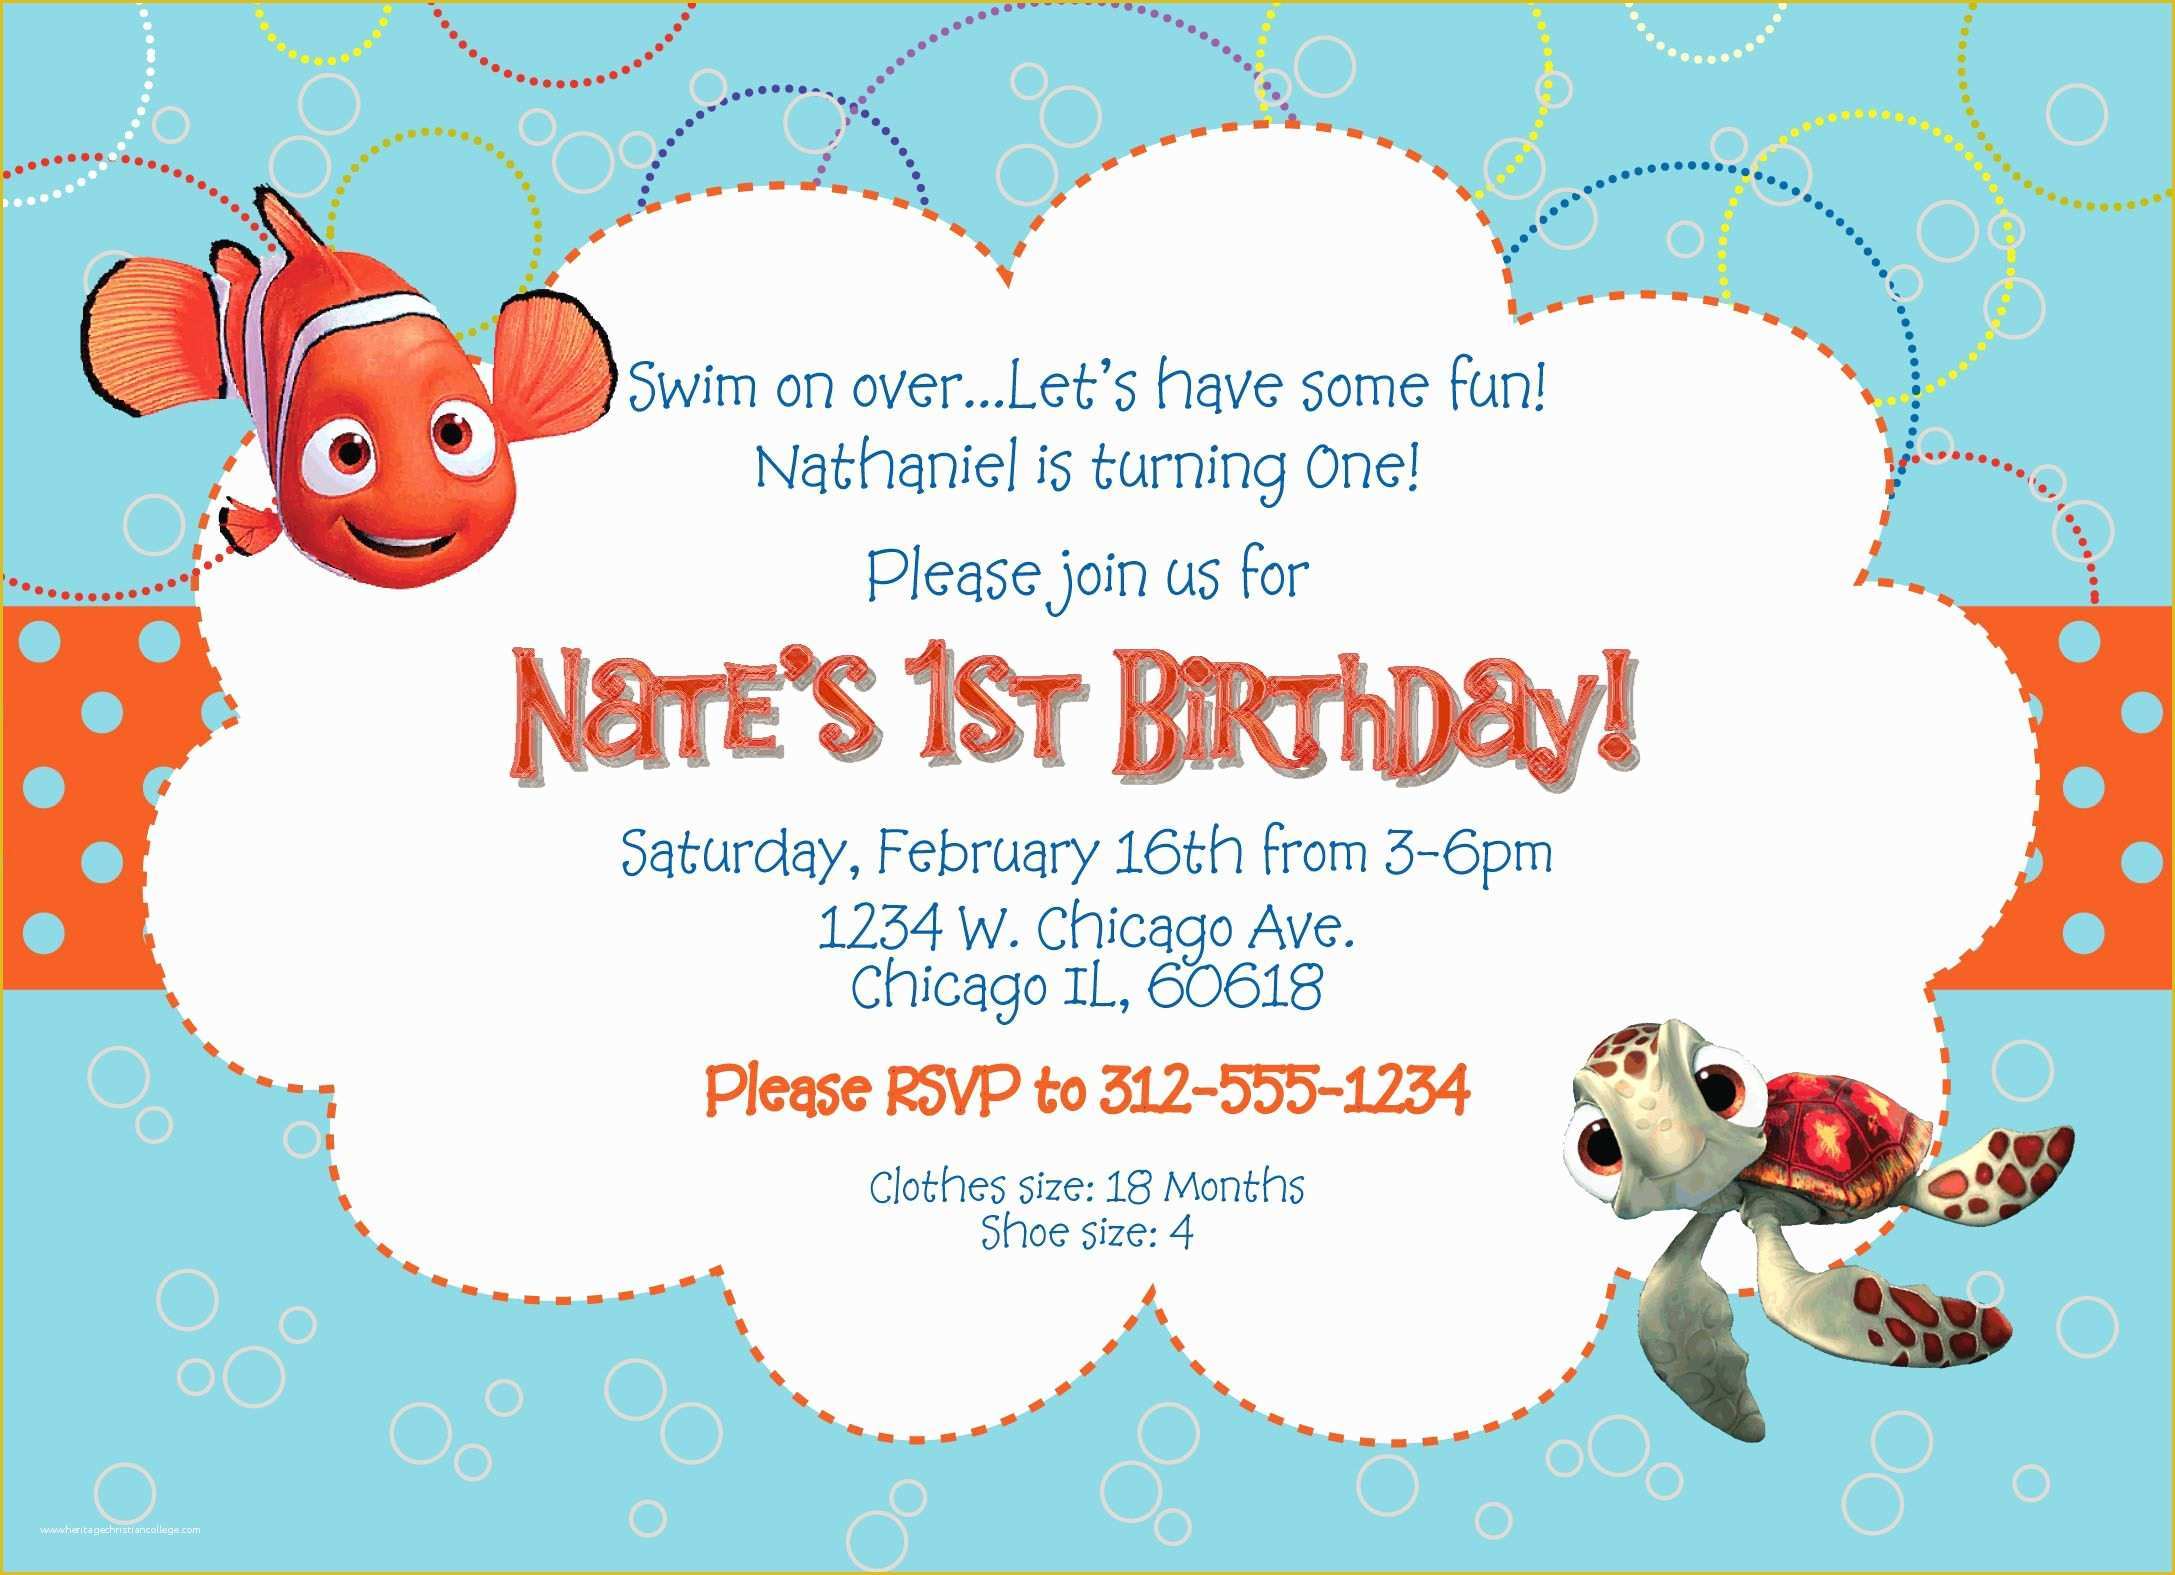 Finding Nemo Invitation Template Free Of Finding Nemo Birthday Invitations and Ideas How to